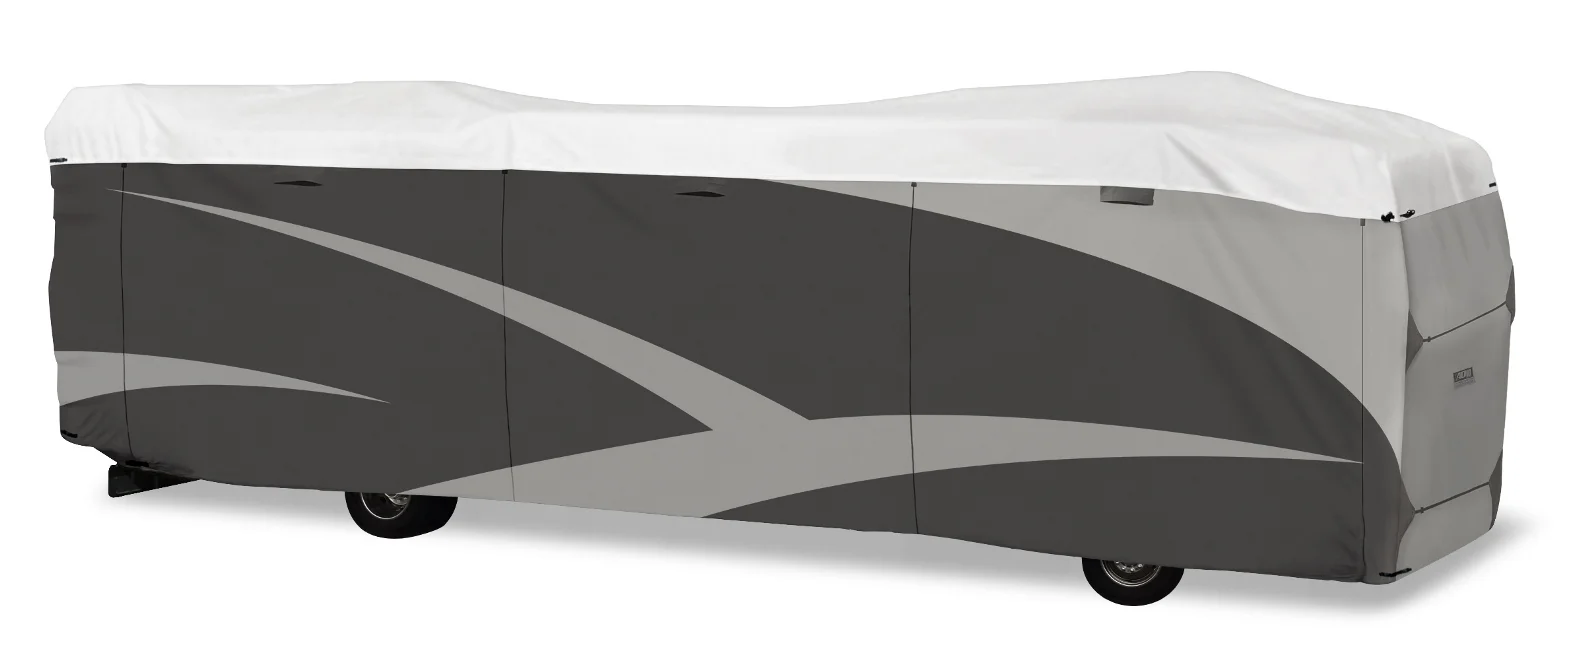 Adco Class A RV Covers